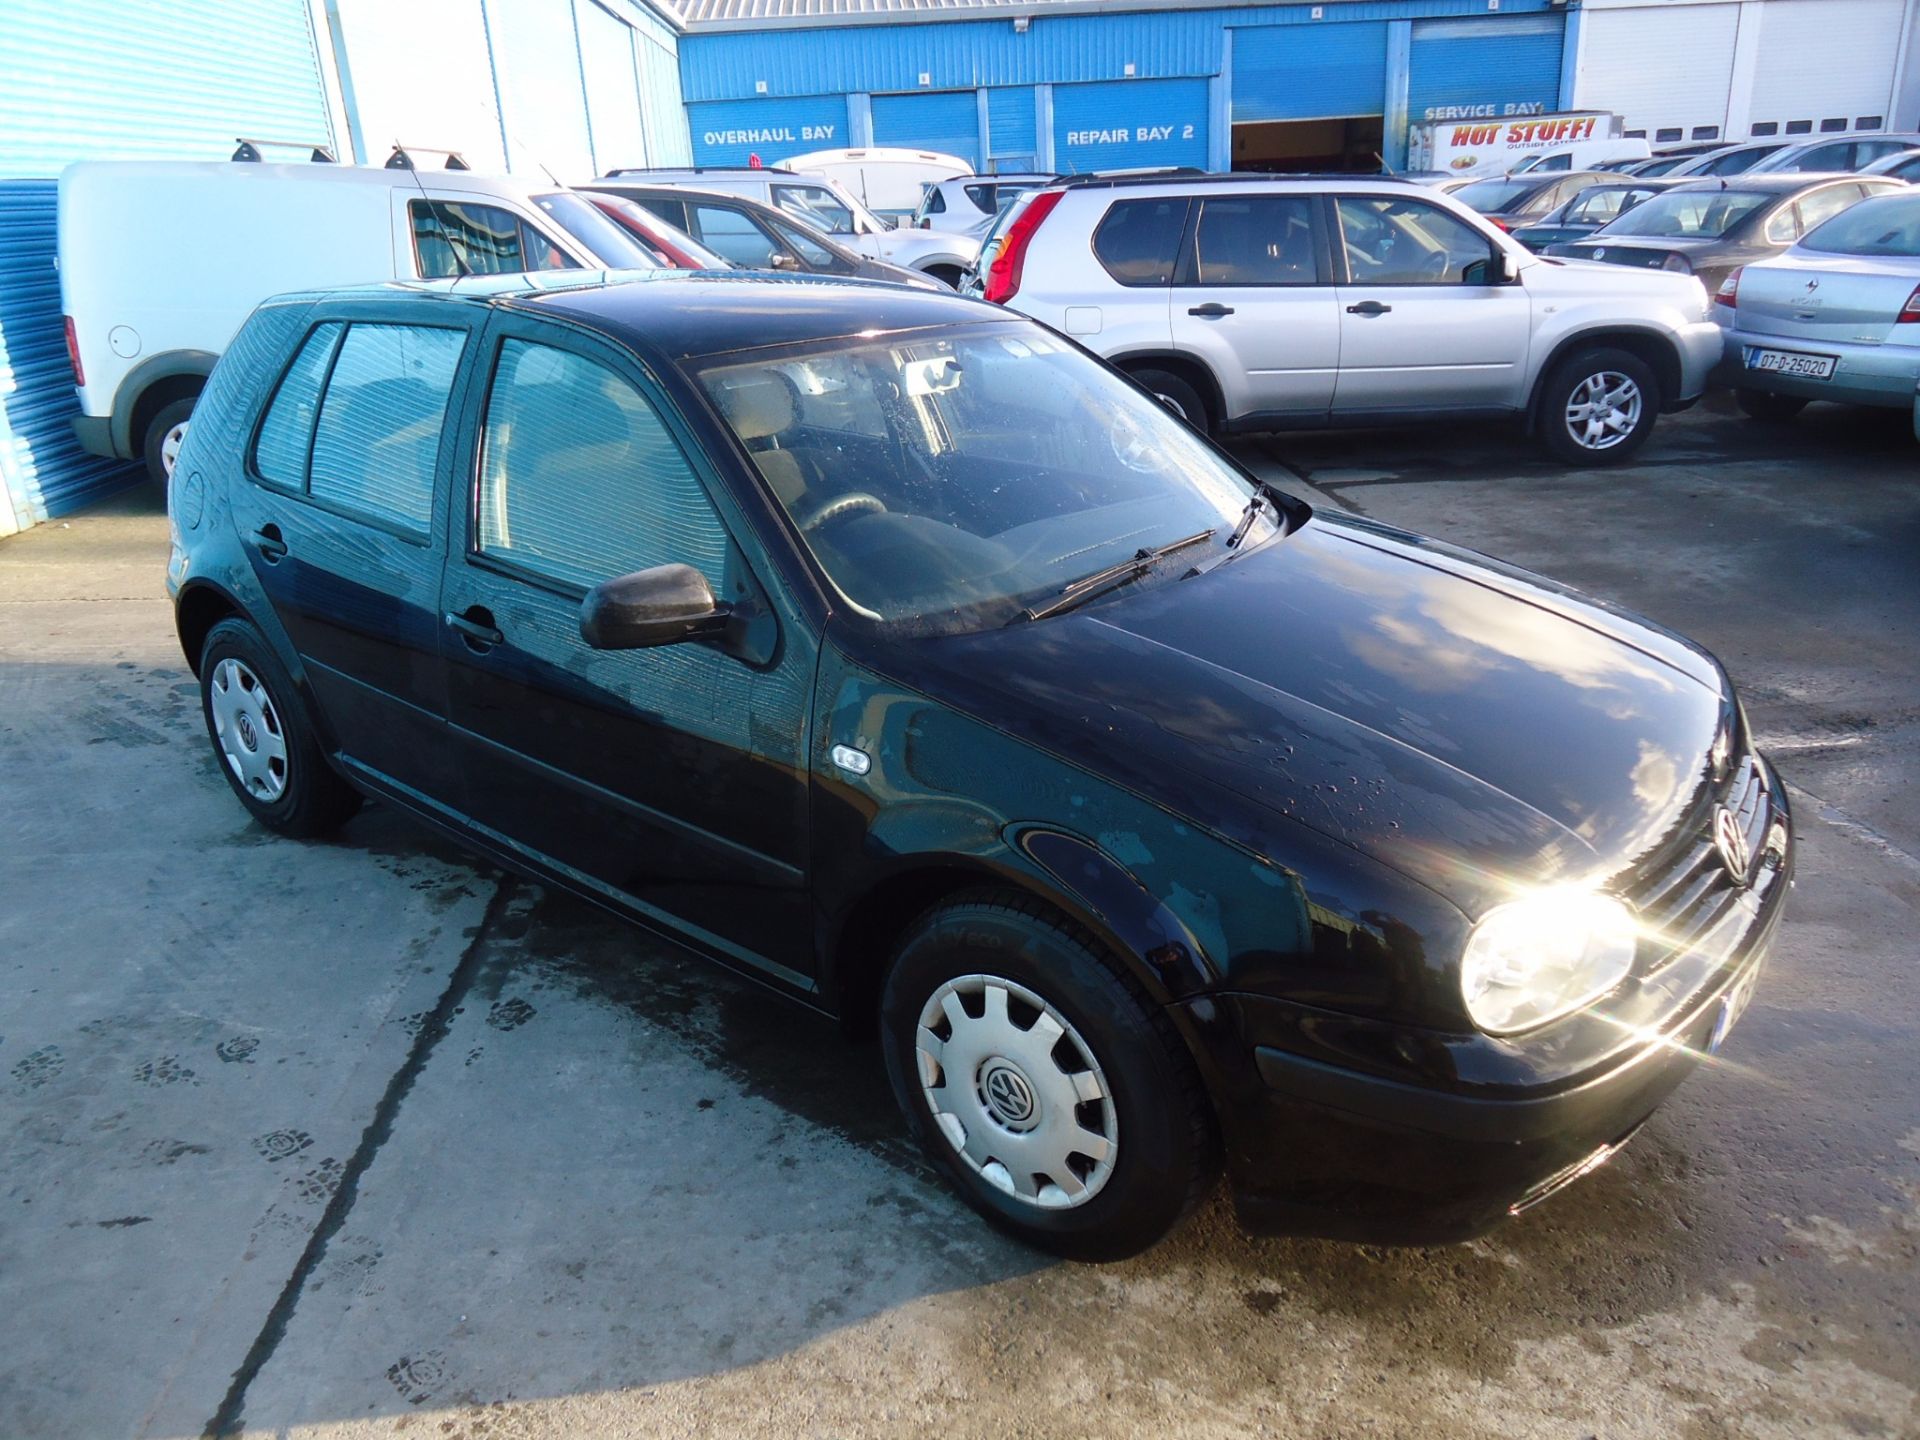 03WD1200 VW Golf - Image 2 of 6